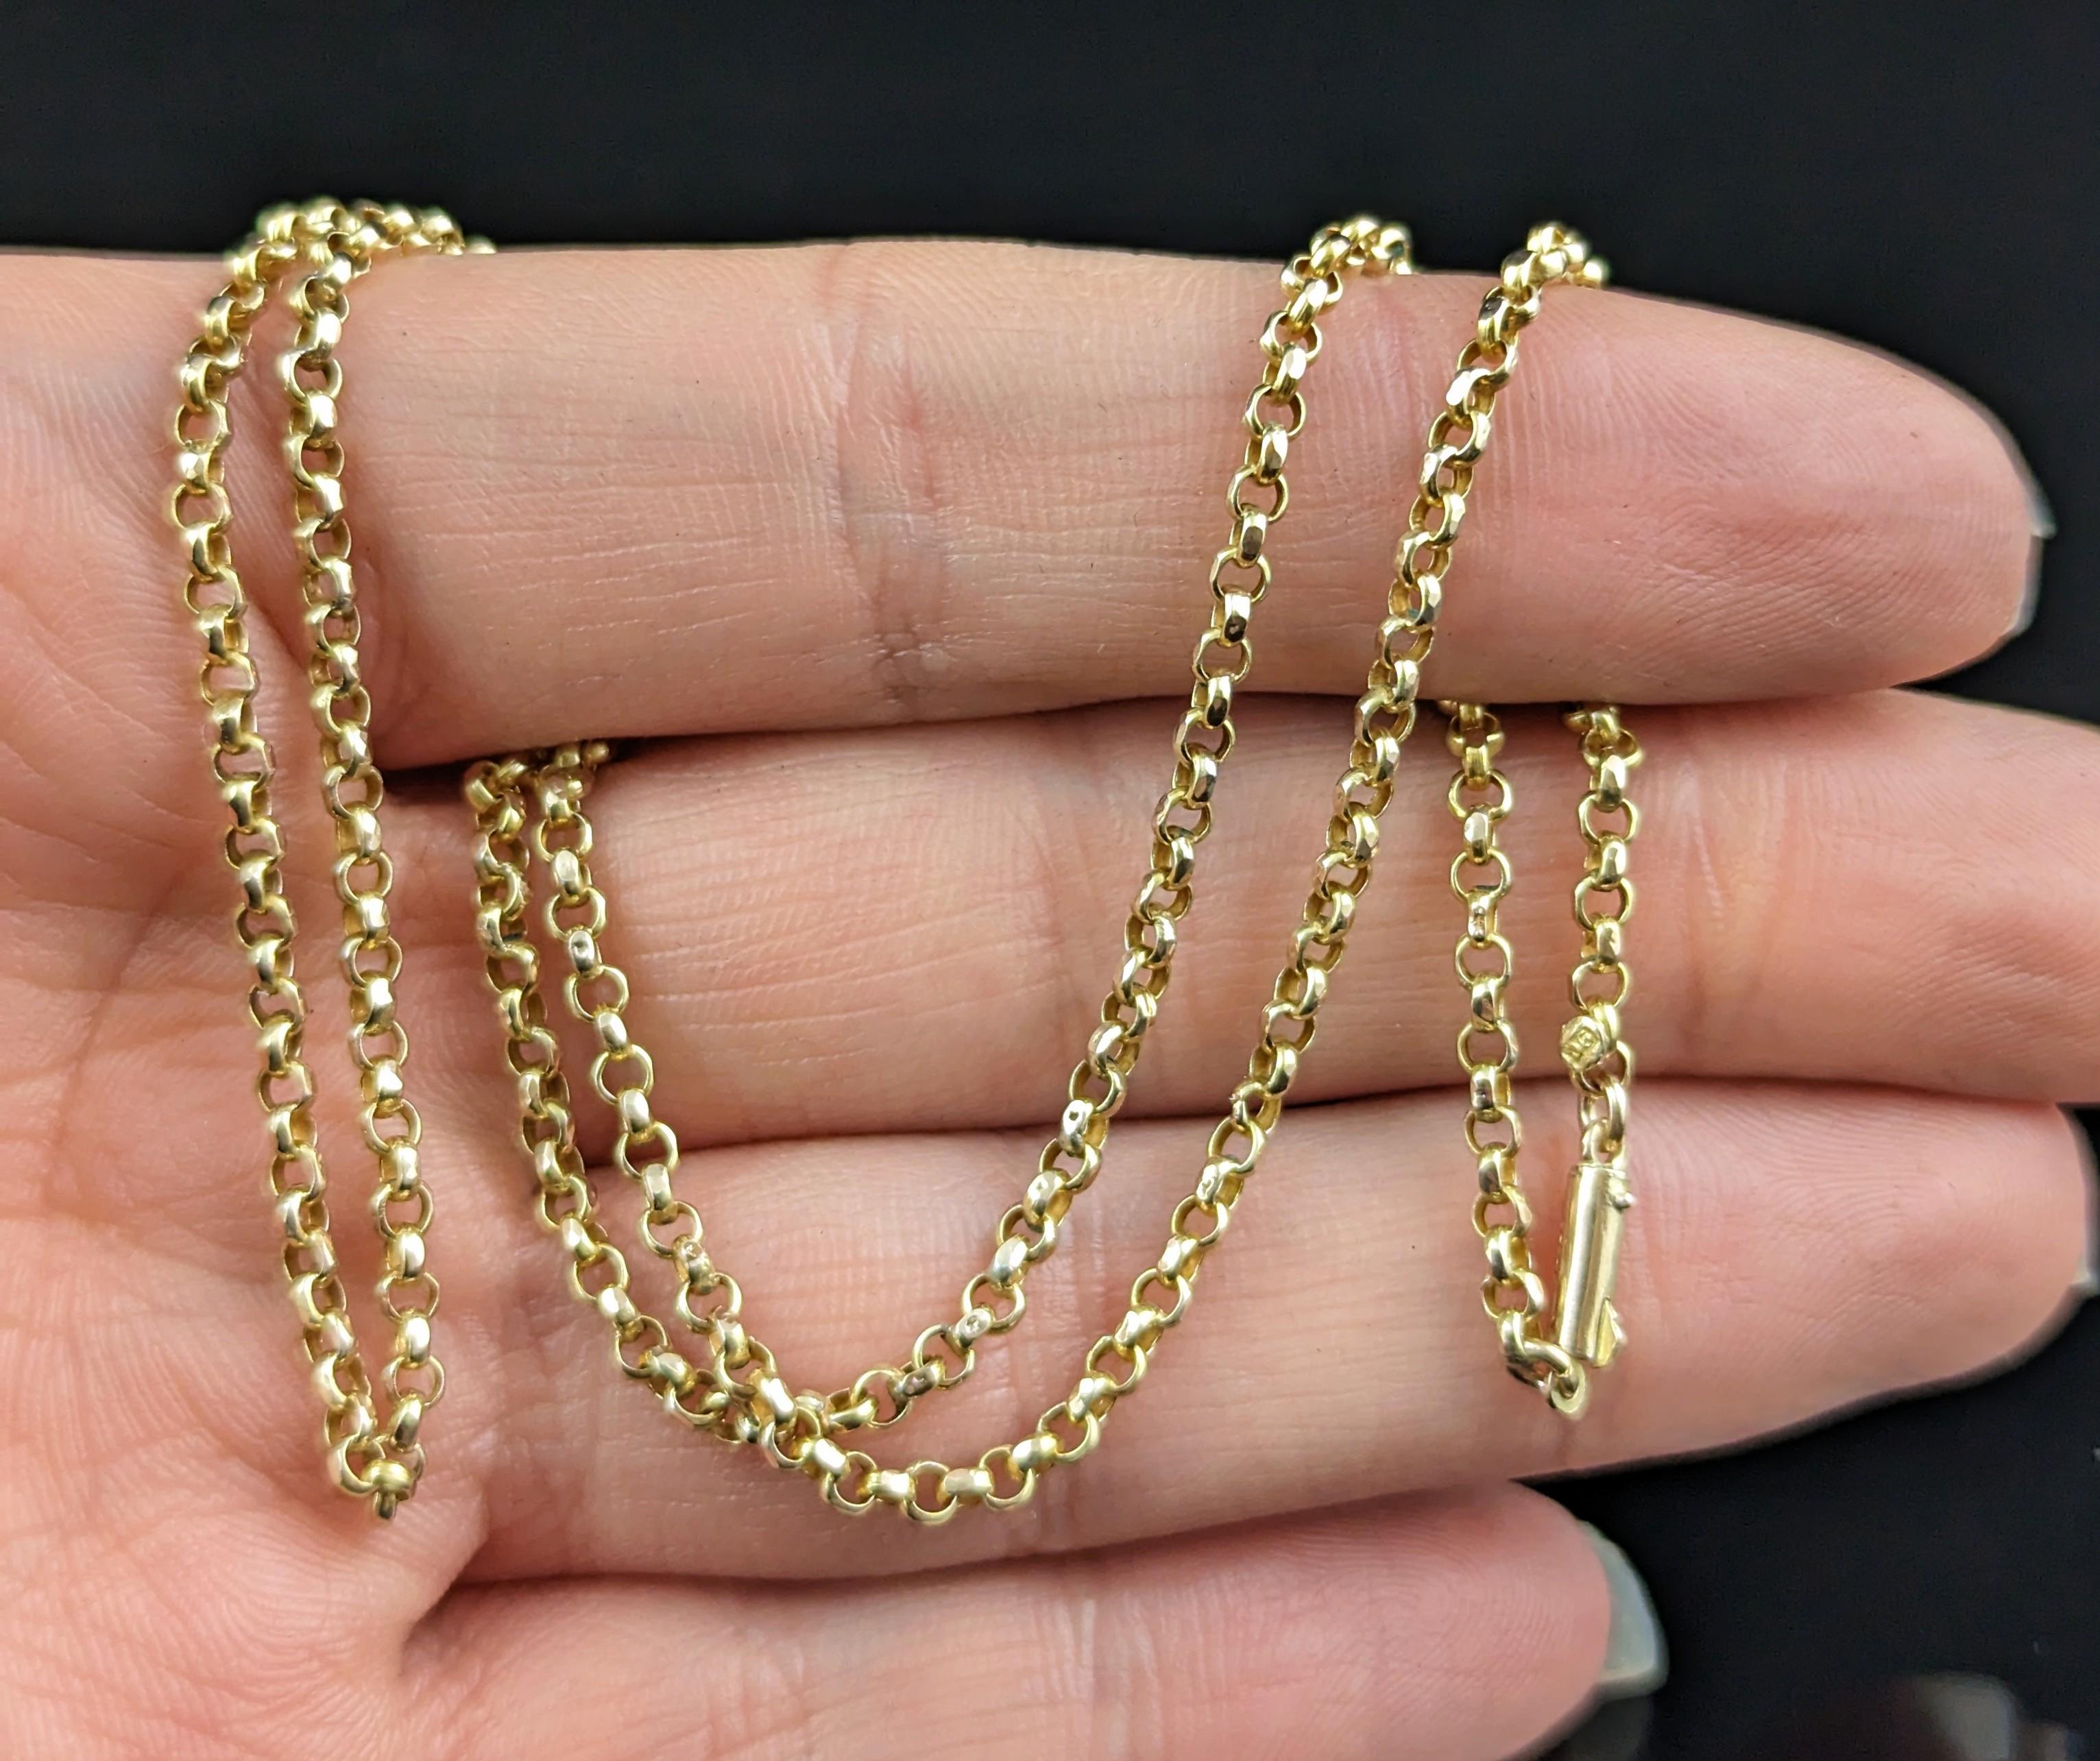 A beautiful antique, Edwardian era 9ct yellow gold Belcher or rolo link chain necklace.

Rich gold links with a pretty rolo or Belcher design, this classic beauty is a nice wearable length at 20.75